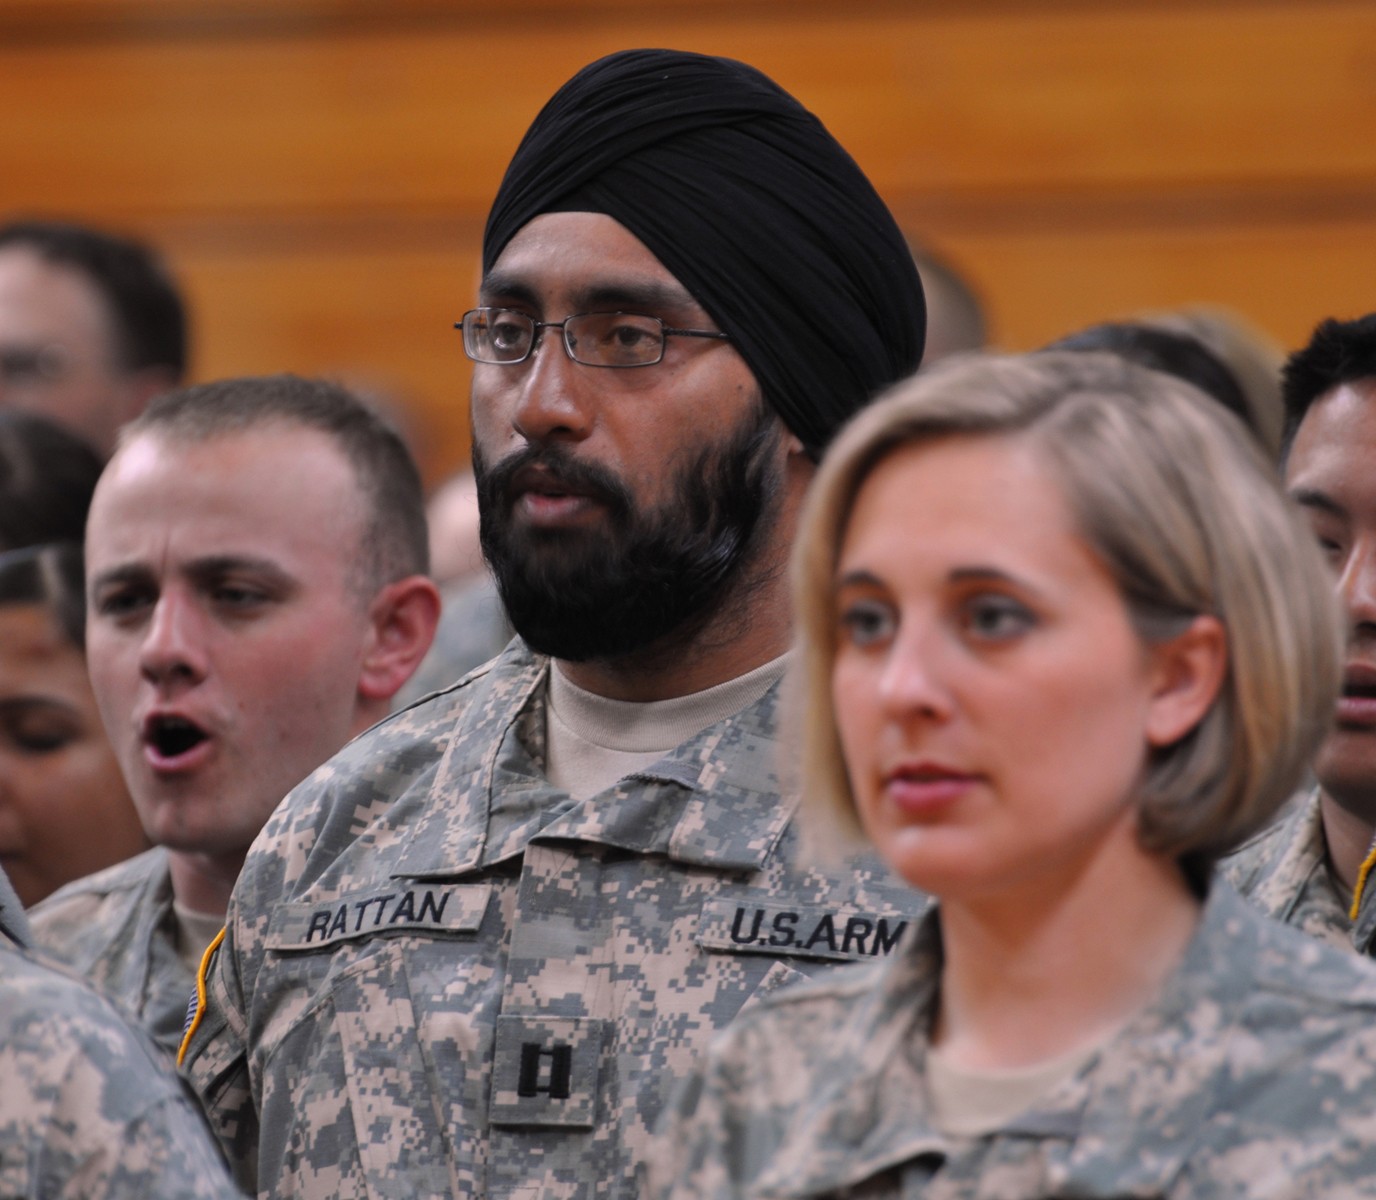 Sikh Soldiers allowed to serve, retain their articles of faith | Article |  The United States Army